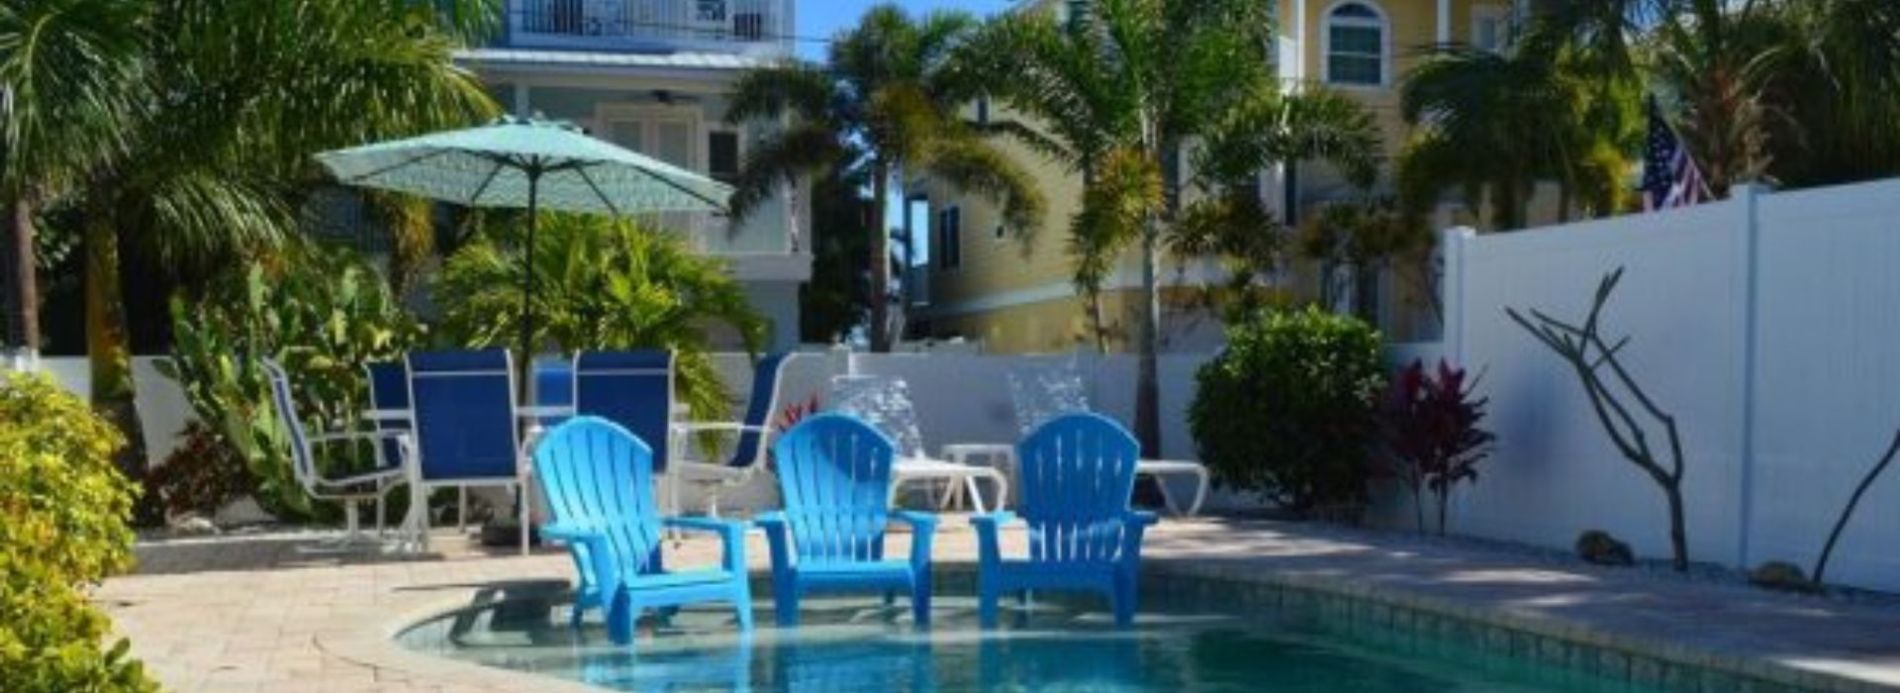 pool and chairs